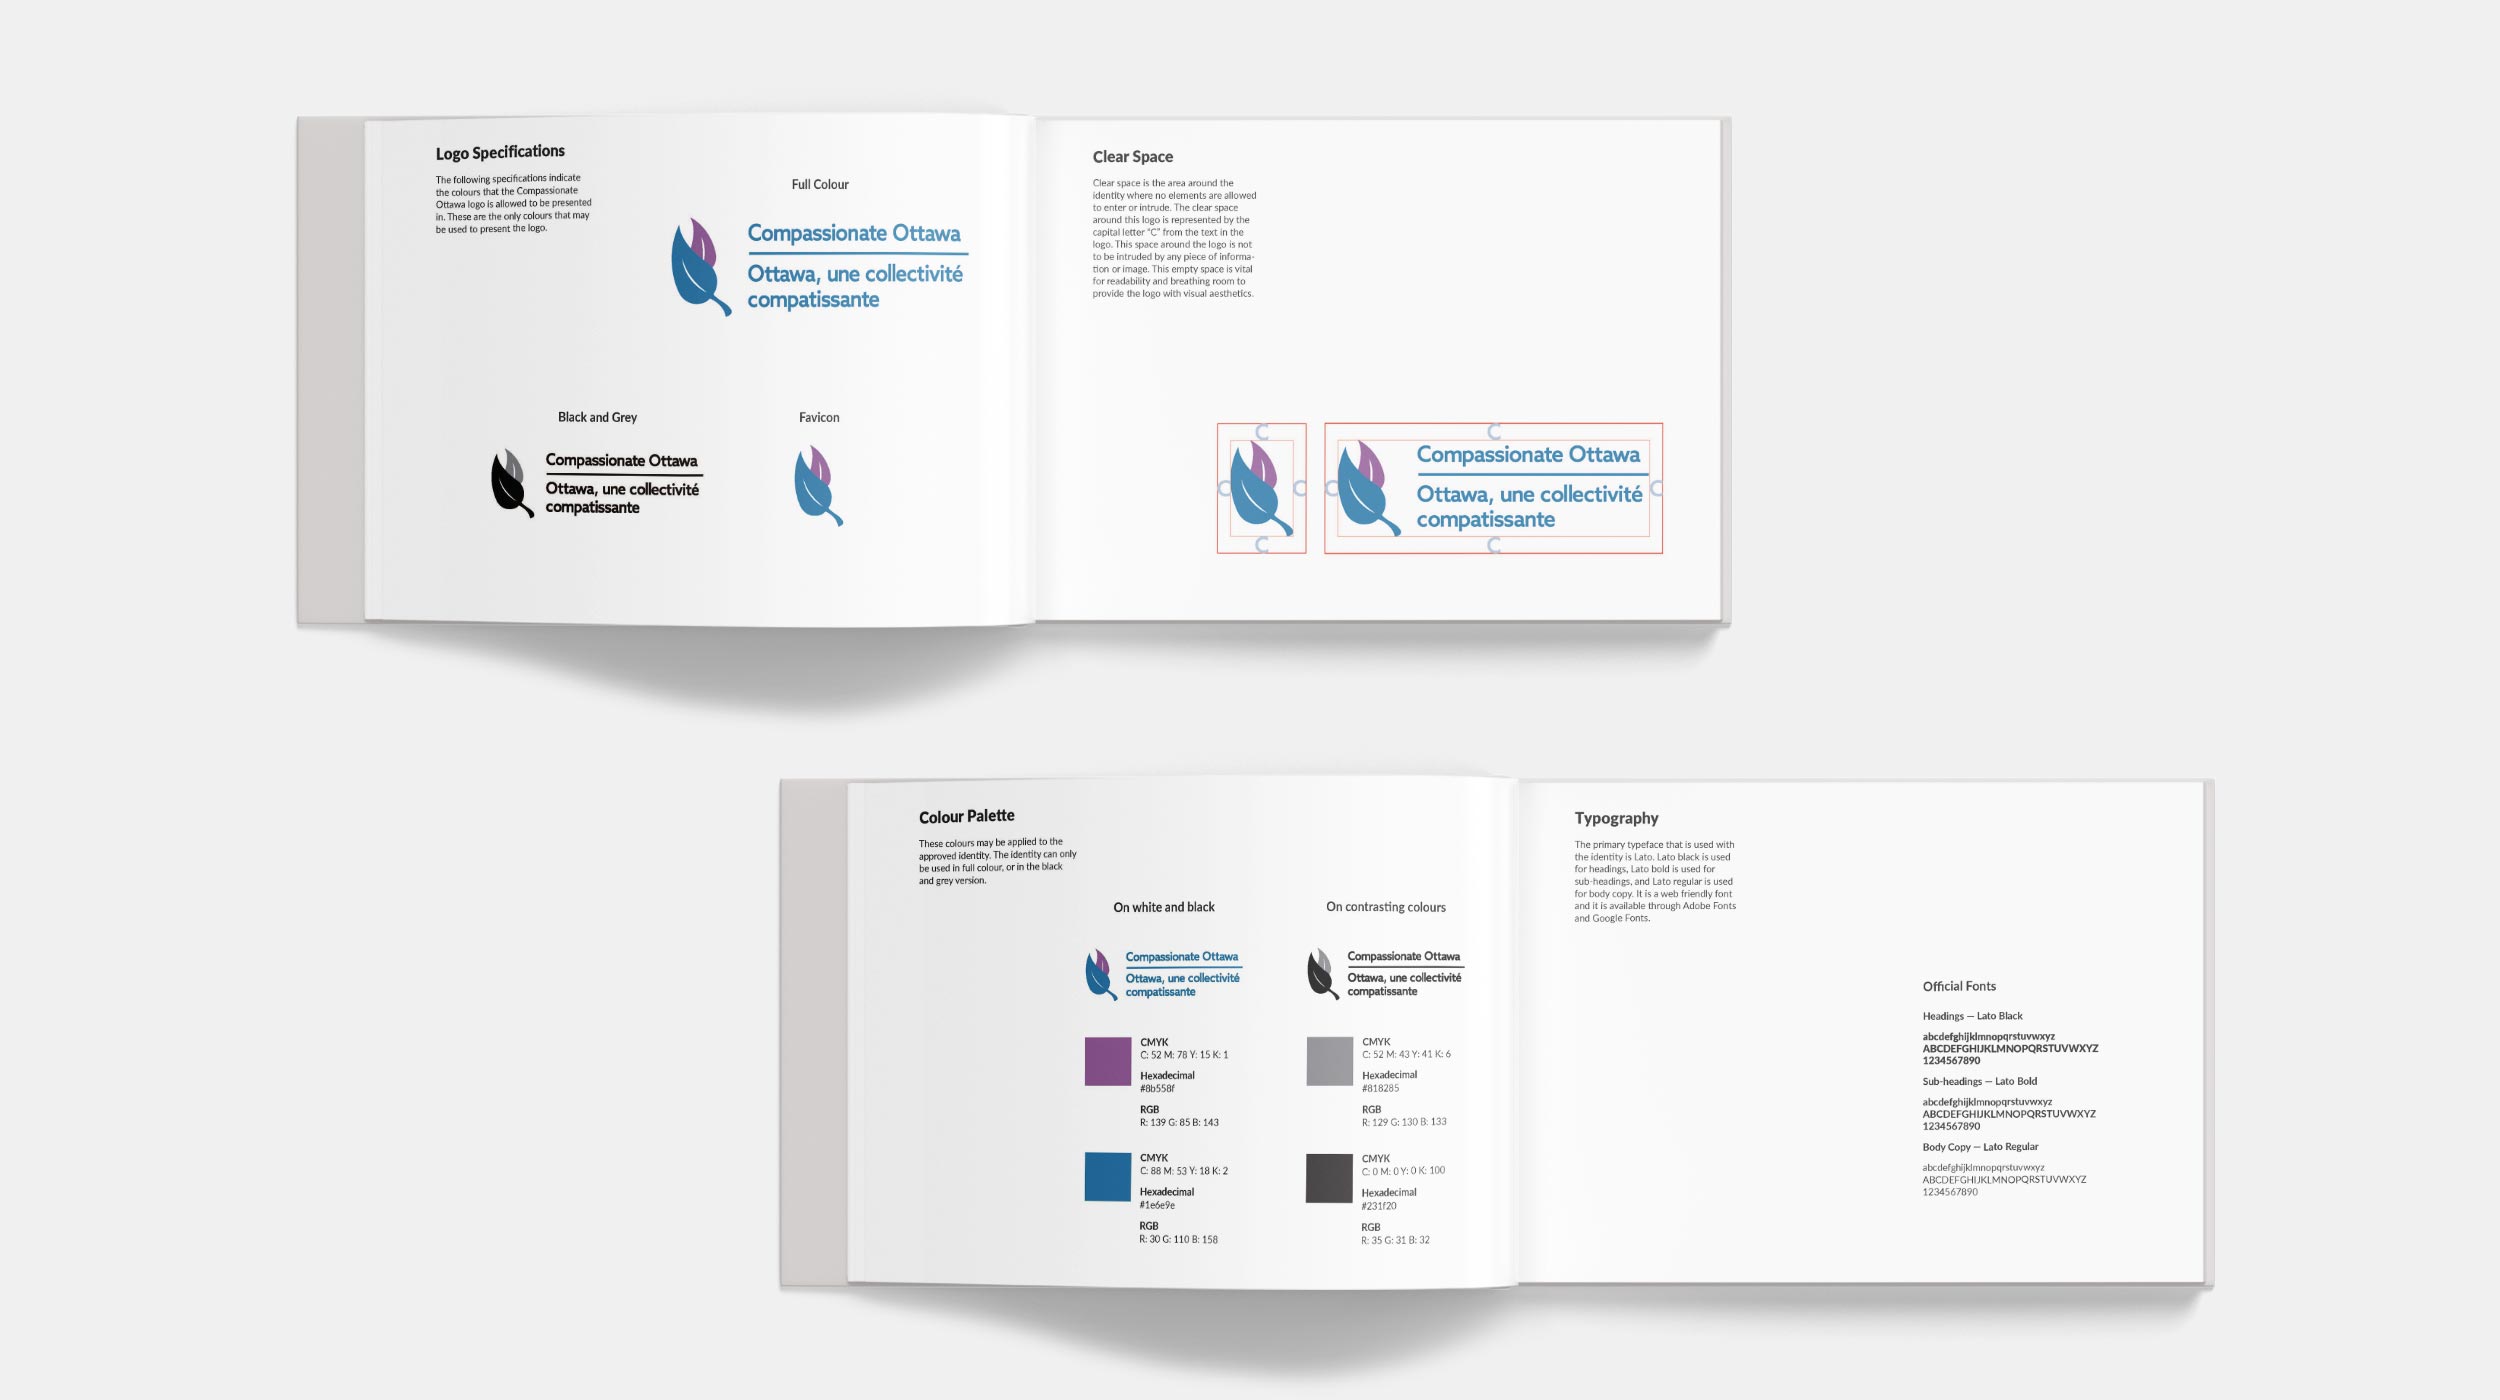 This is an image of the branding guide for the new logo